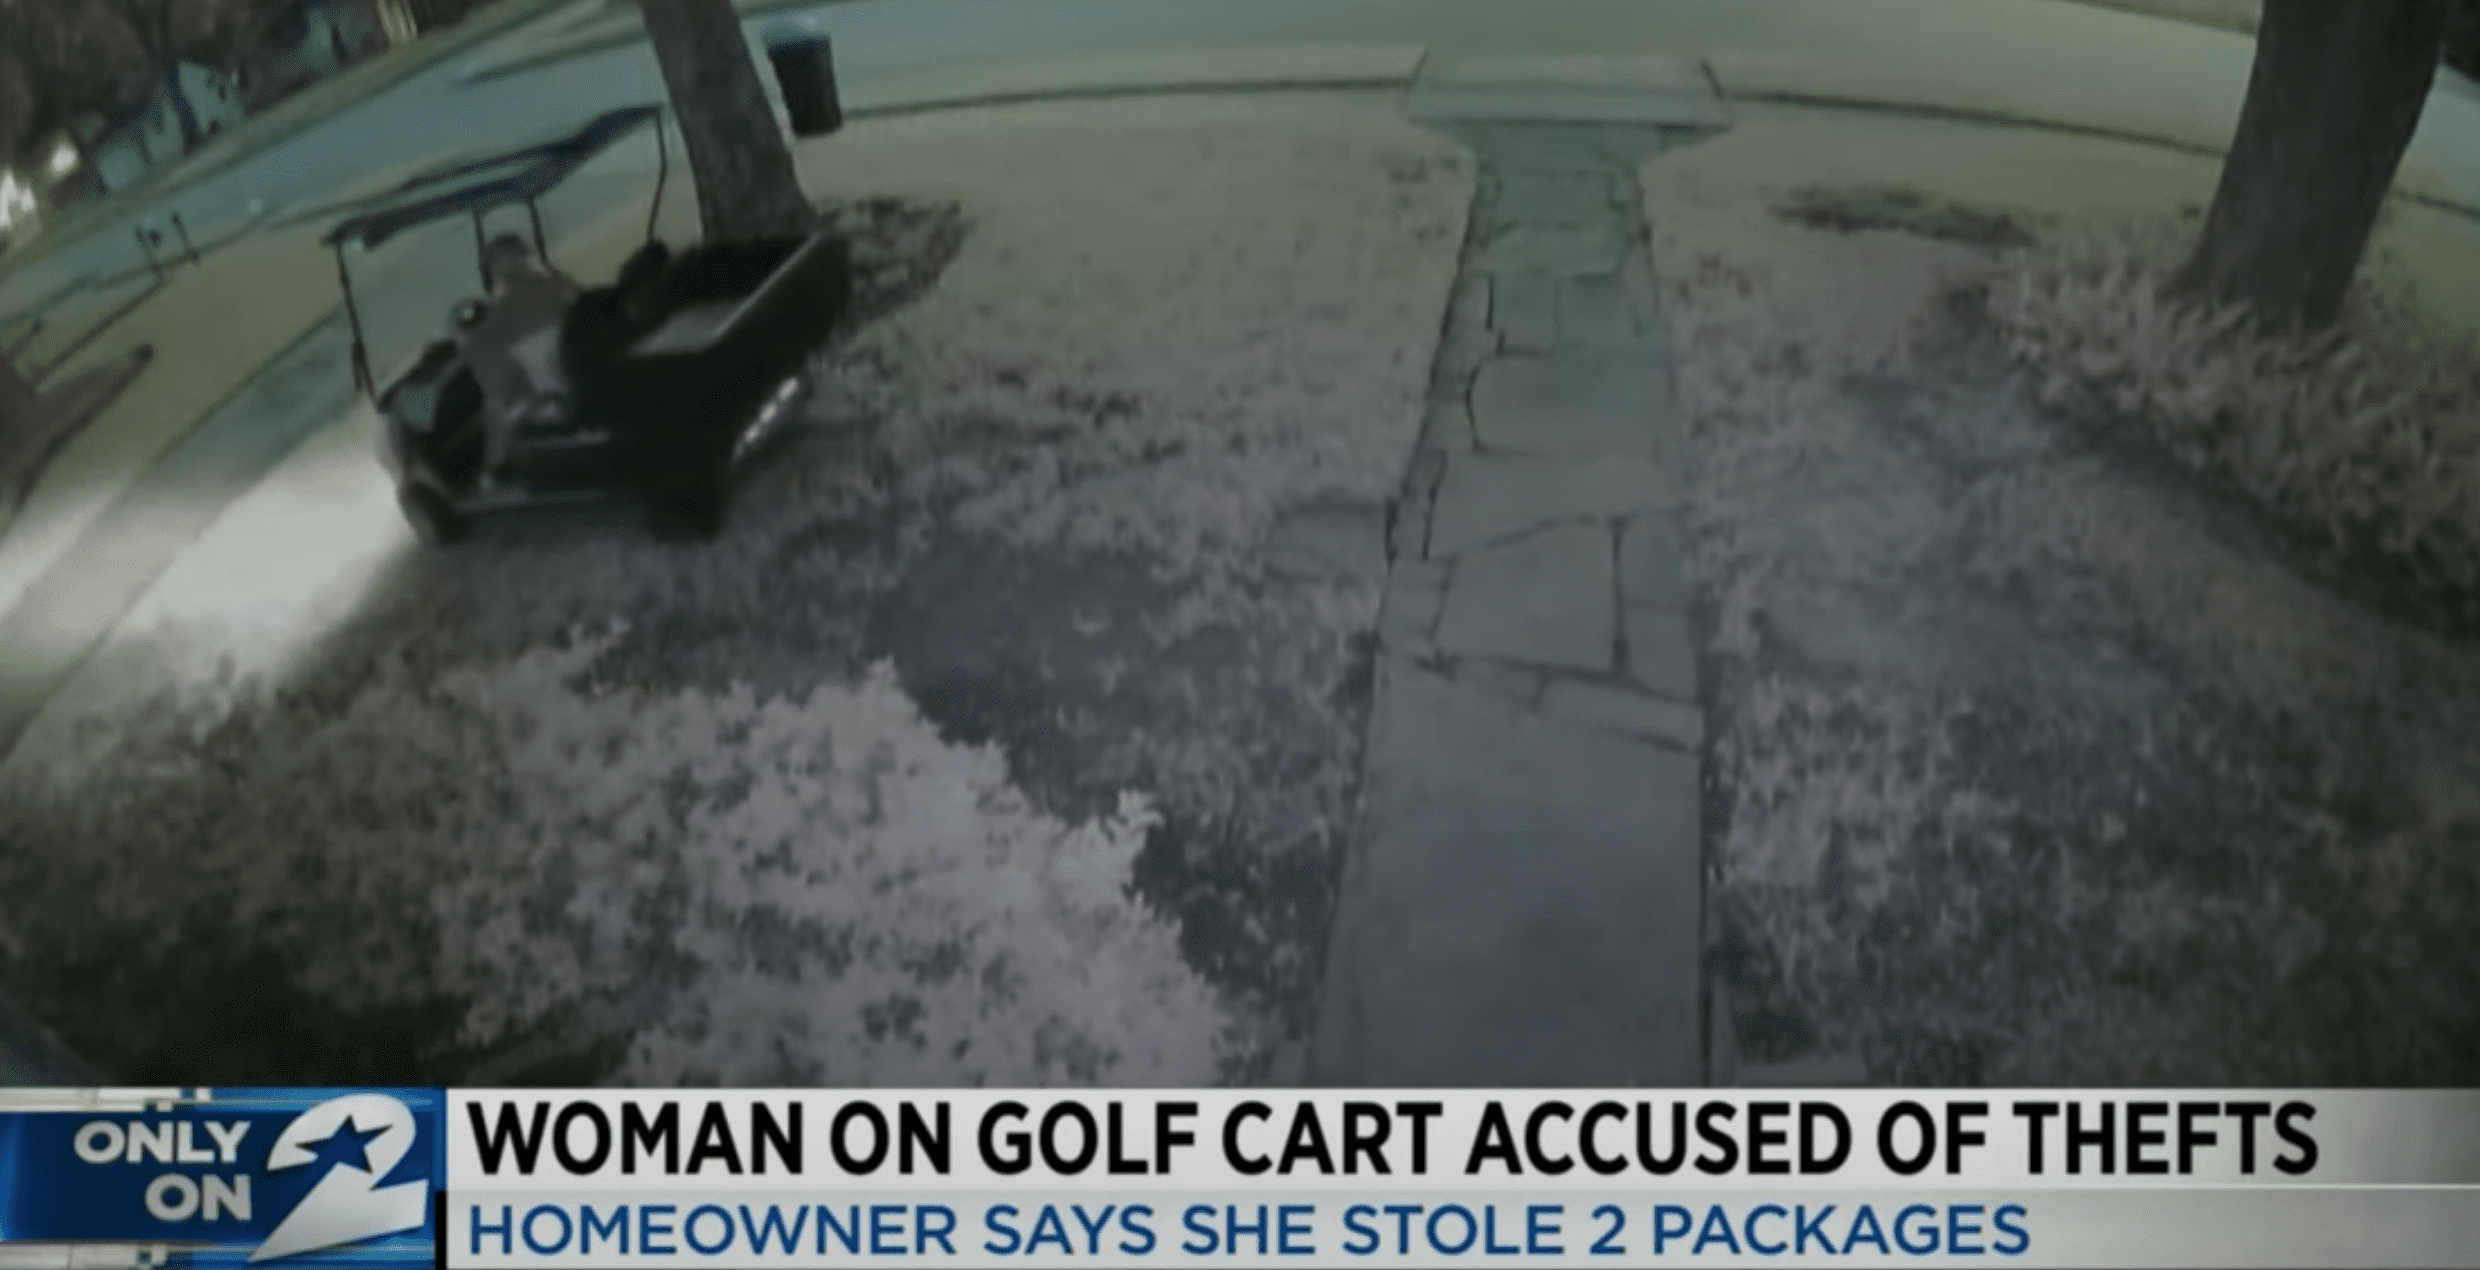 The alleged porch pirate is seen as she takes off with the packages in her golf cart | Photo: Youtube/KPRC 2 Click2Houston